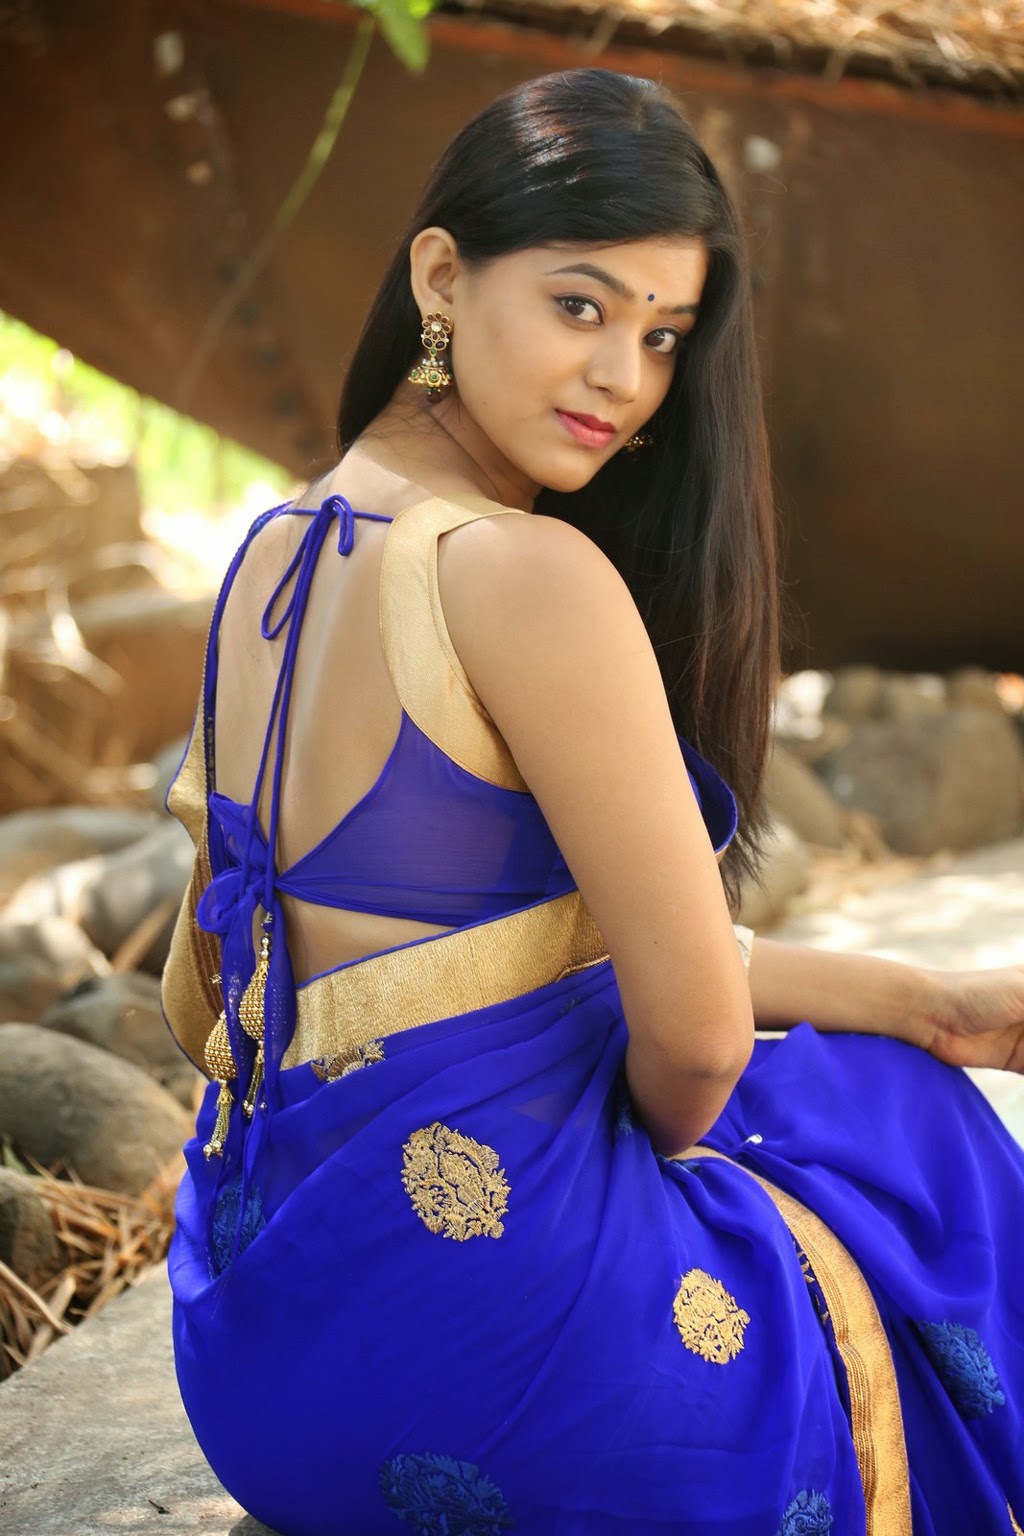 Welcome To Indian Bollywood Beauty Tamil Beautiful Actress Yamini Bhaskar Hot Back Pose In Blue